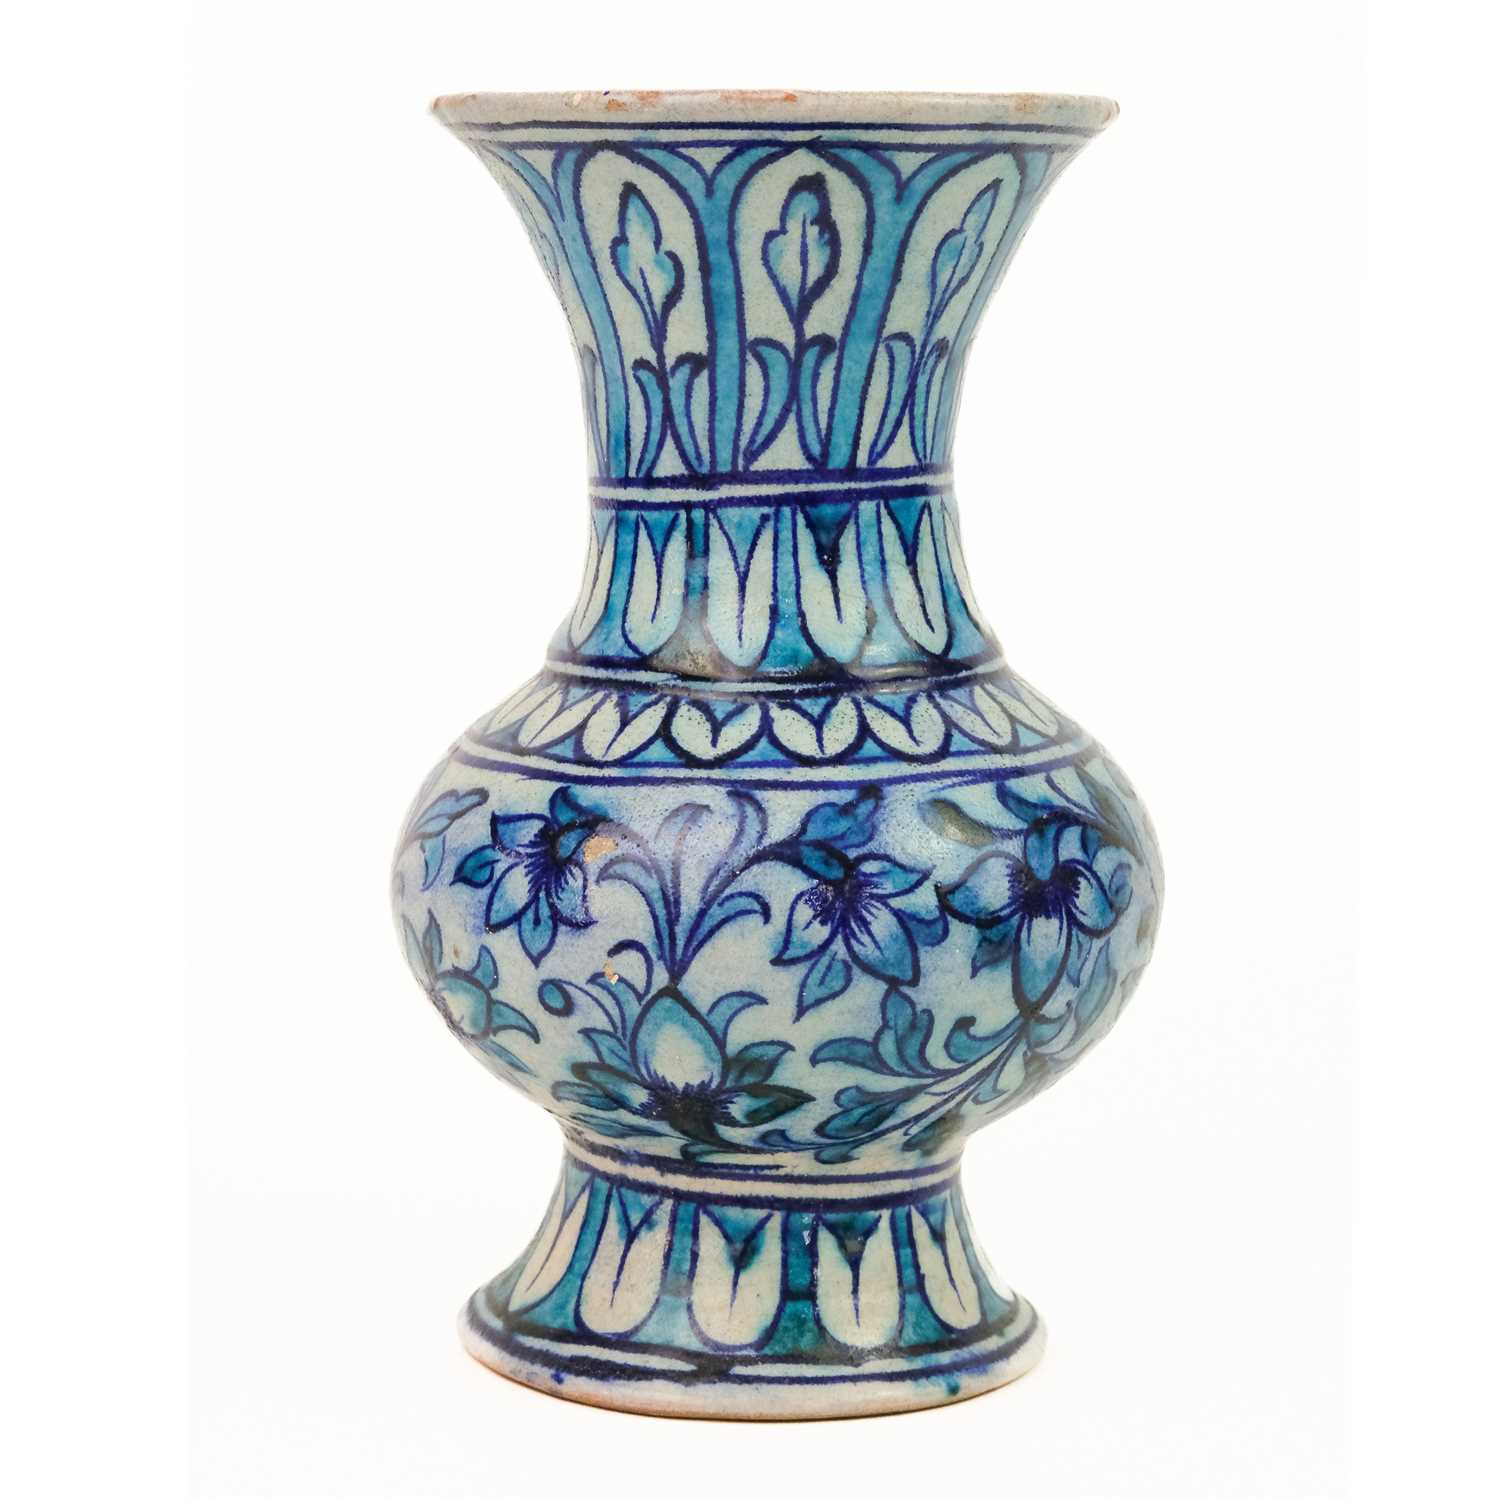 A Sind pottery vase, India, 19th century. - Image 3 of 4